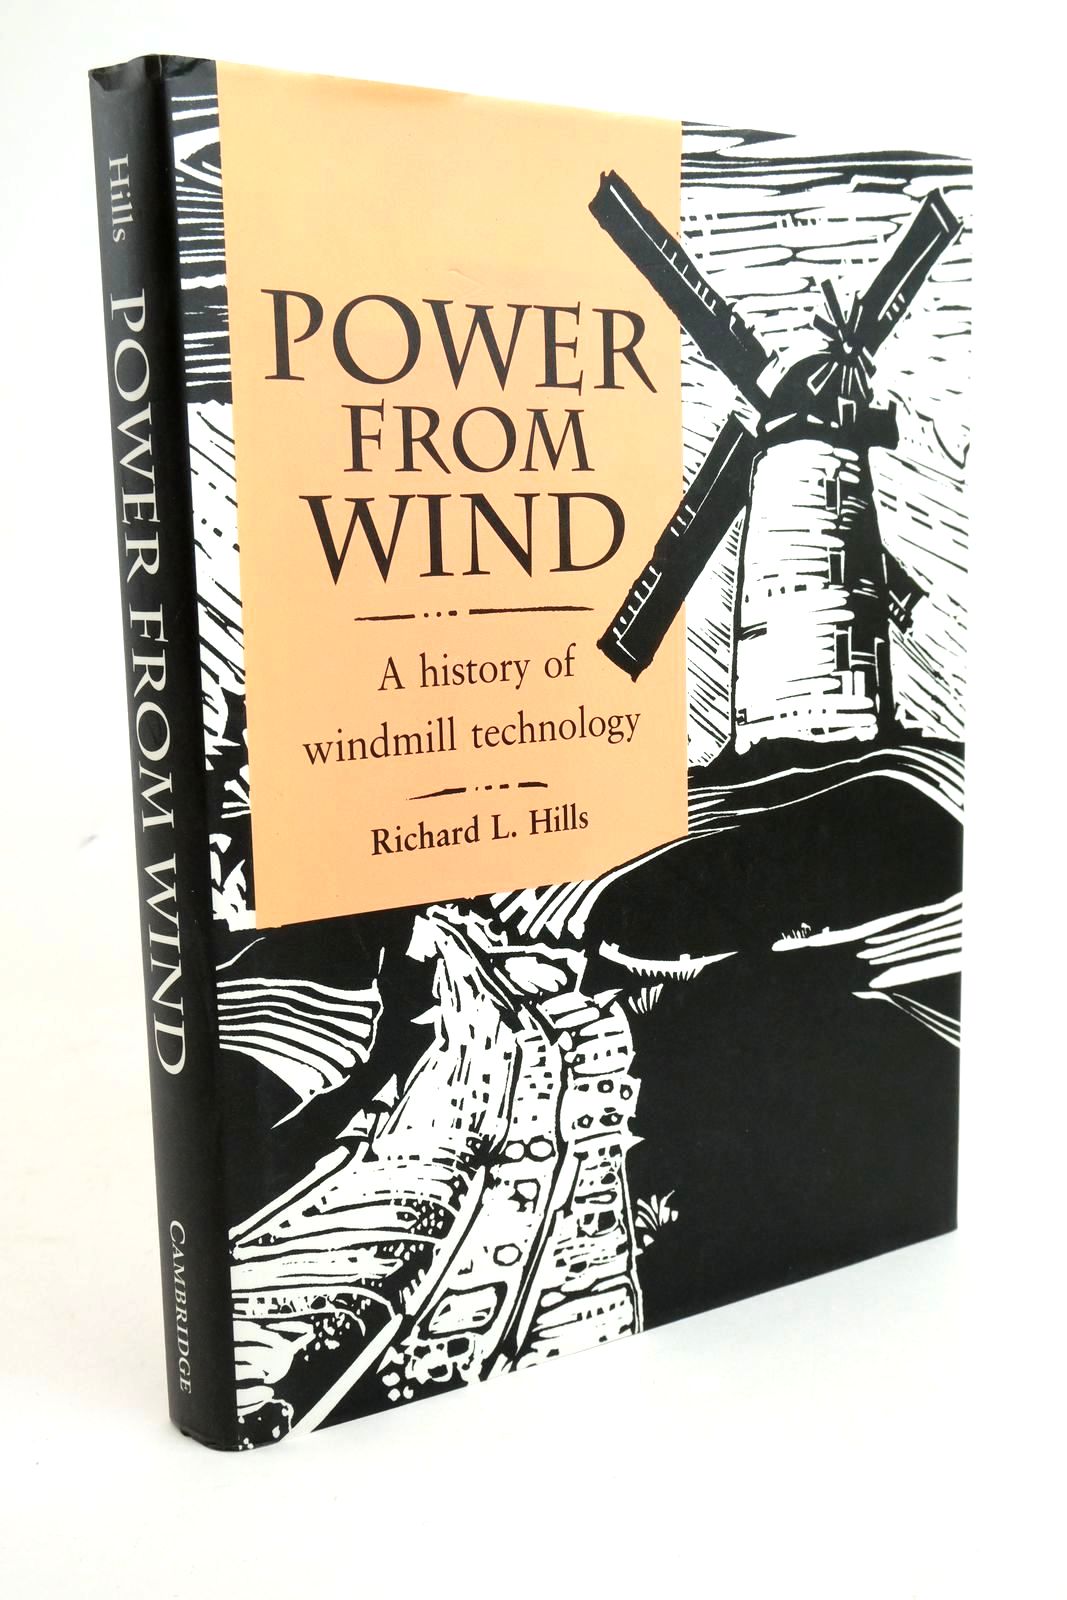 Photo of POWER FROM WIND A HISTORY OF WINDMILL TECHNOLOGY written by Hills, Richard L. published by Cambridge University Press (STOCK CODE: 1322433)  for sale by Stella & Rose's Books